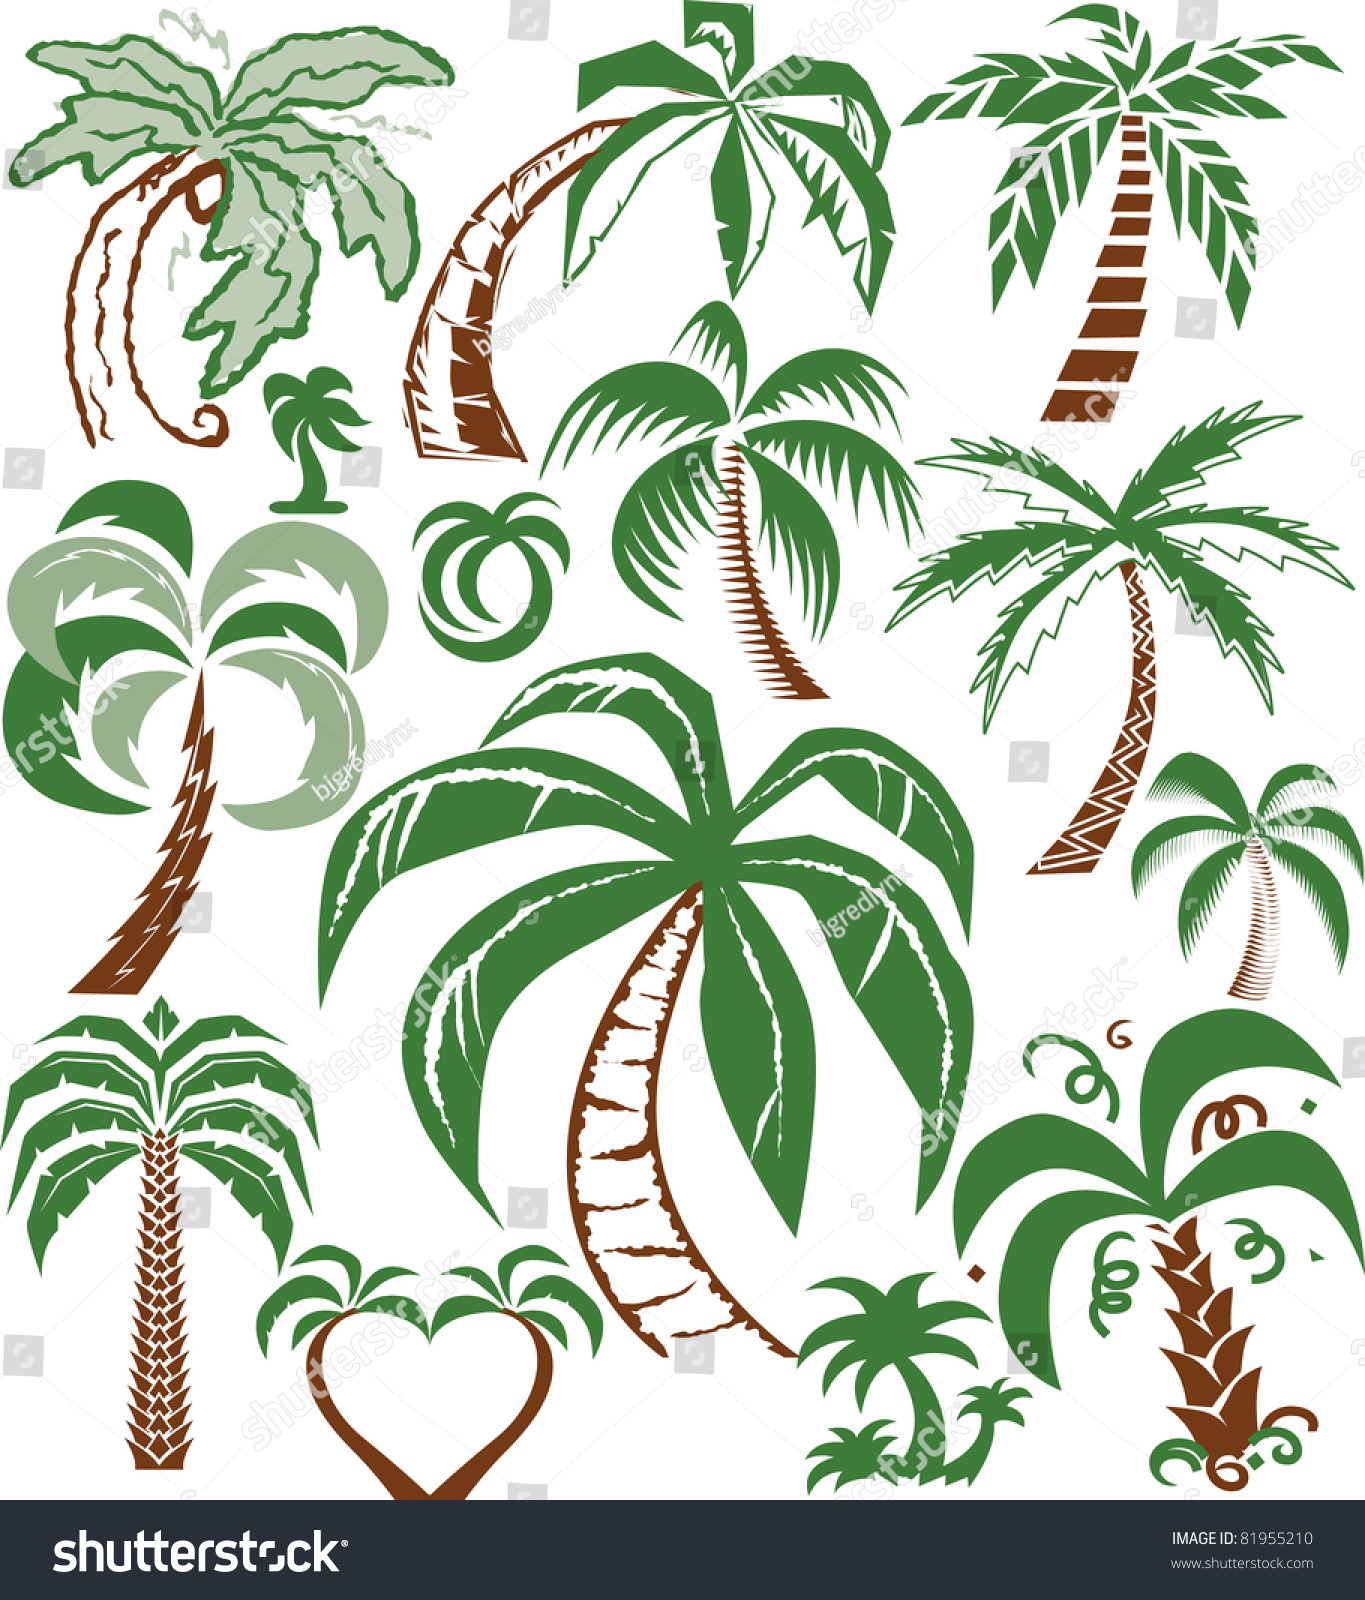 Palm Tree Collection Stock Vector 81955210 - Shutterstock